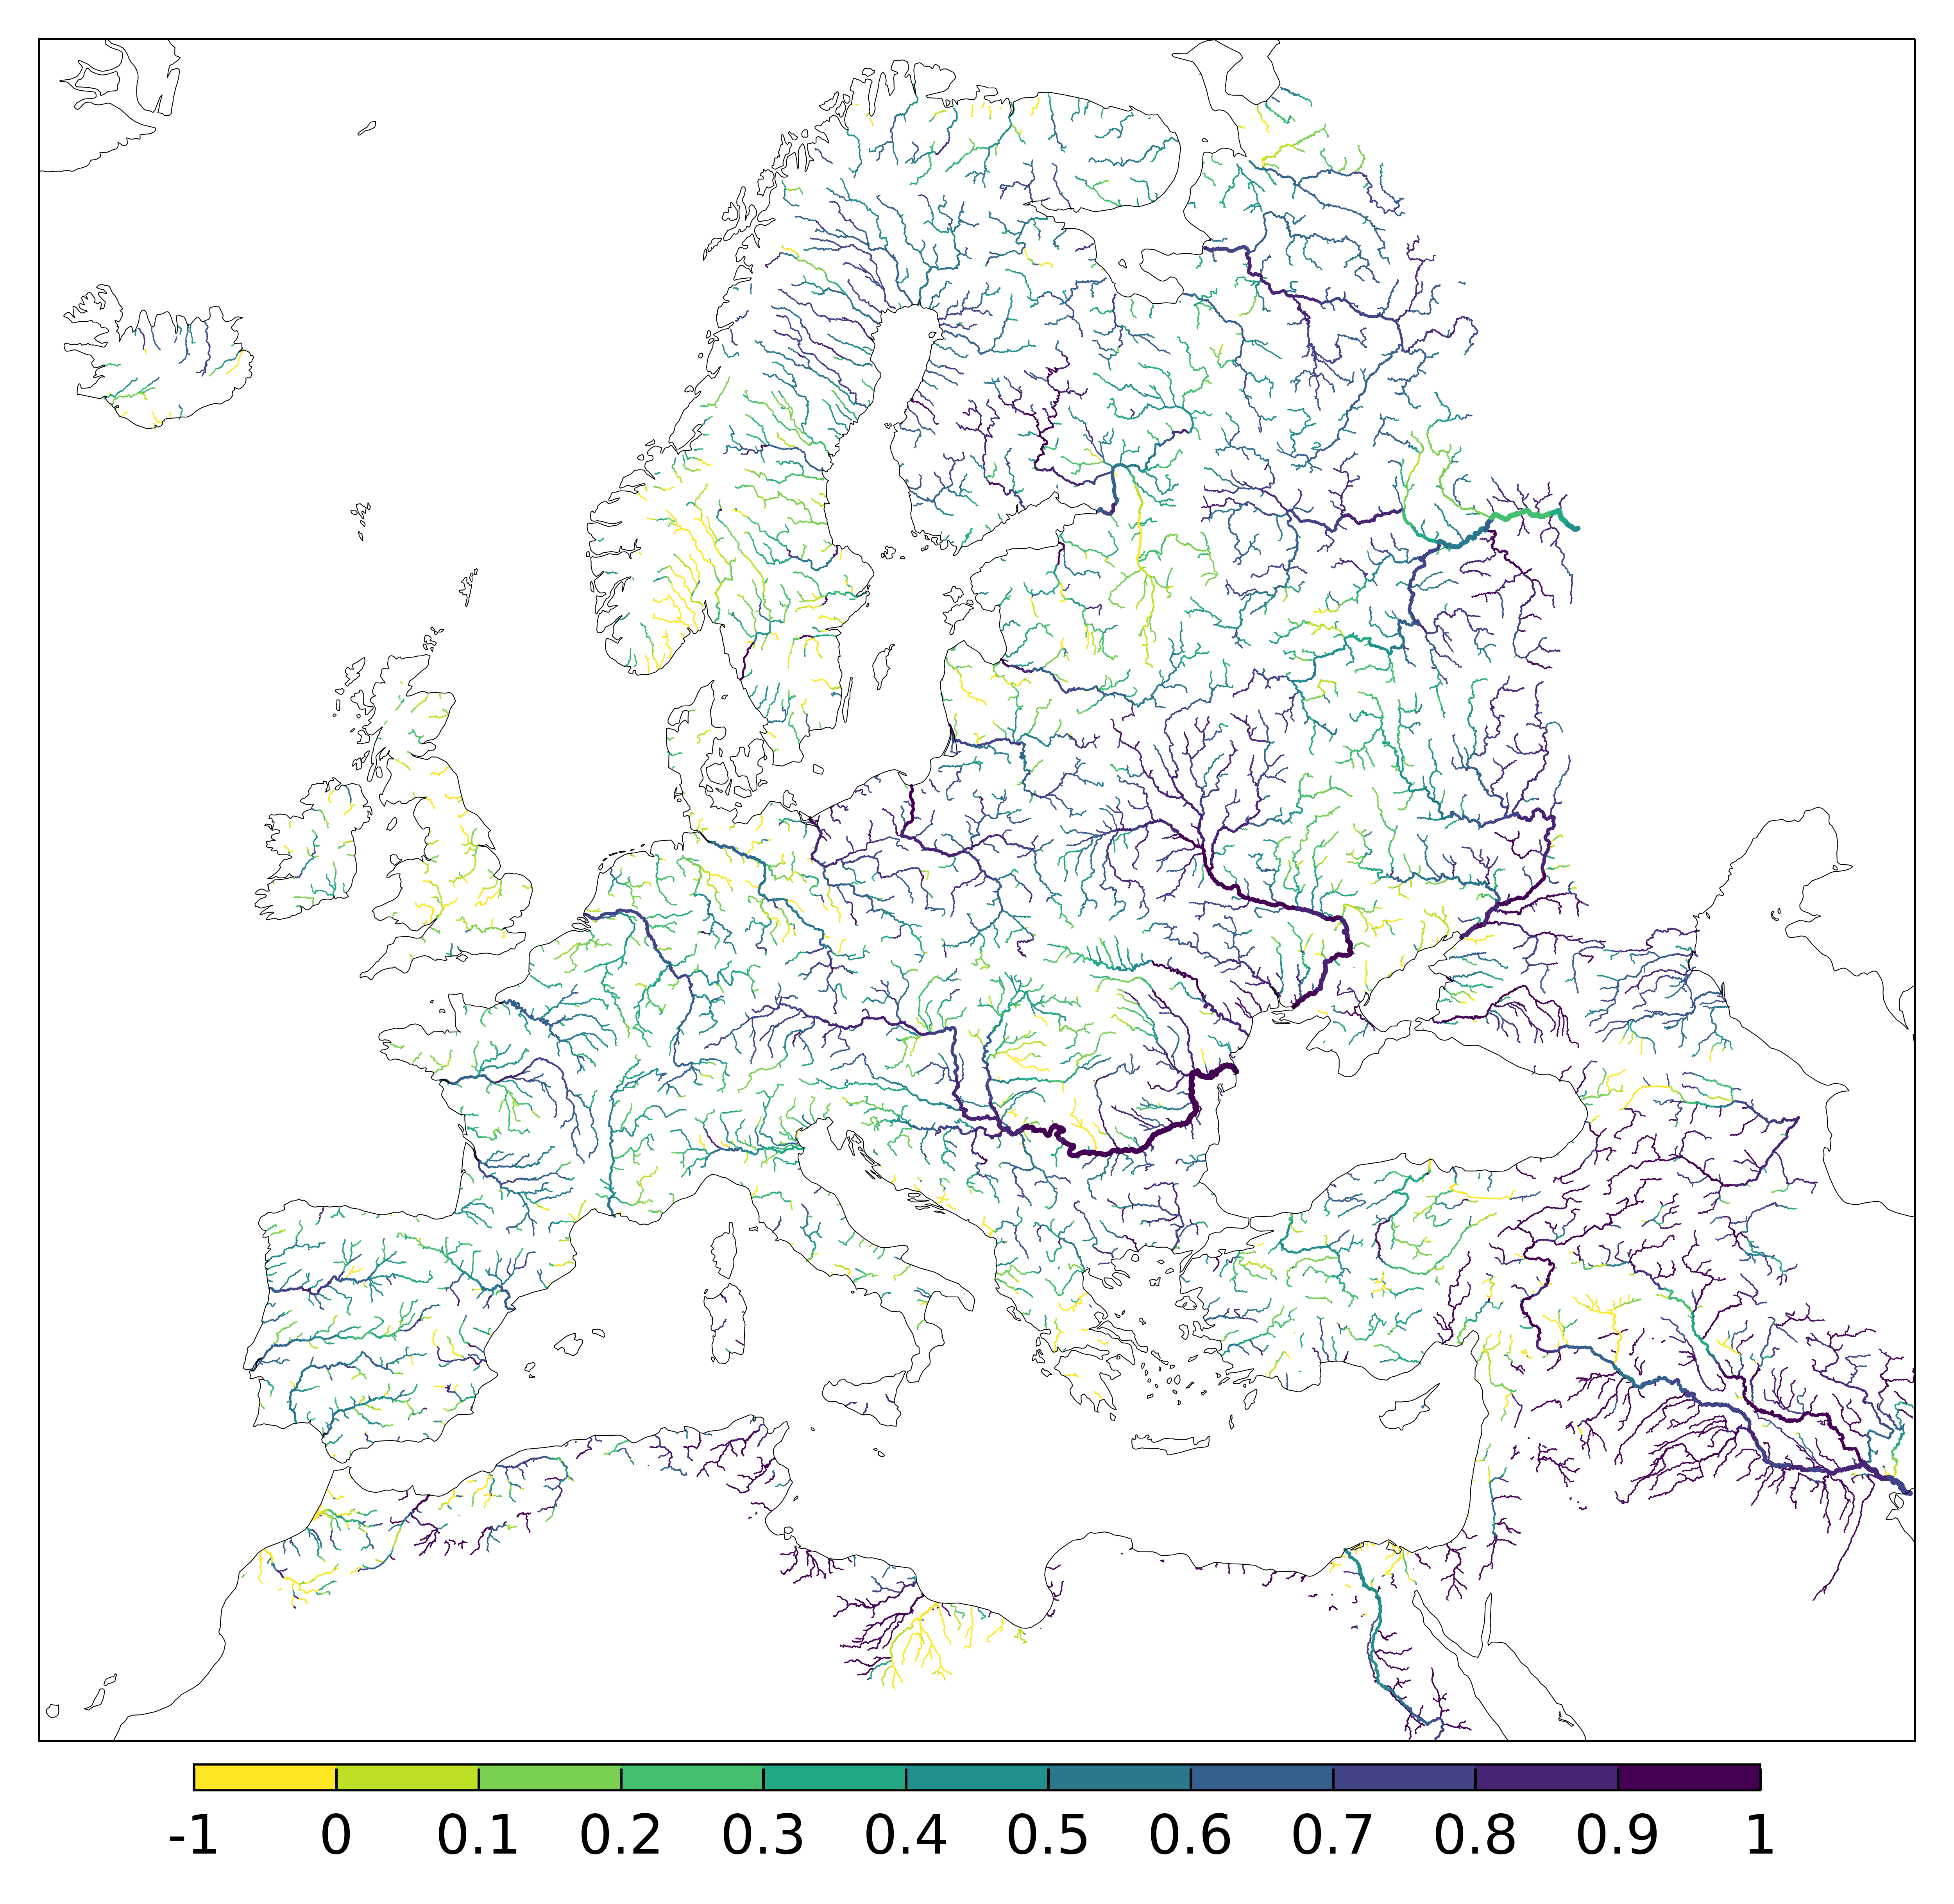 Figure 4. EFAS CRPSS at lead-time 10 day for October 2023 across the EFAS domain for catchments larger than 1000km2. Climatology is used as the reference forecast.